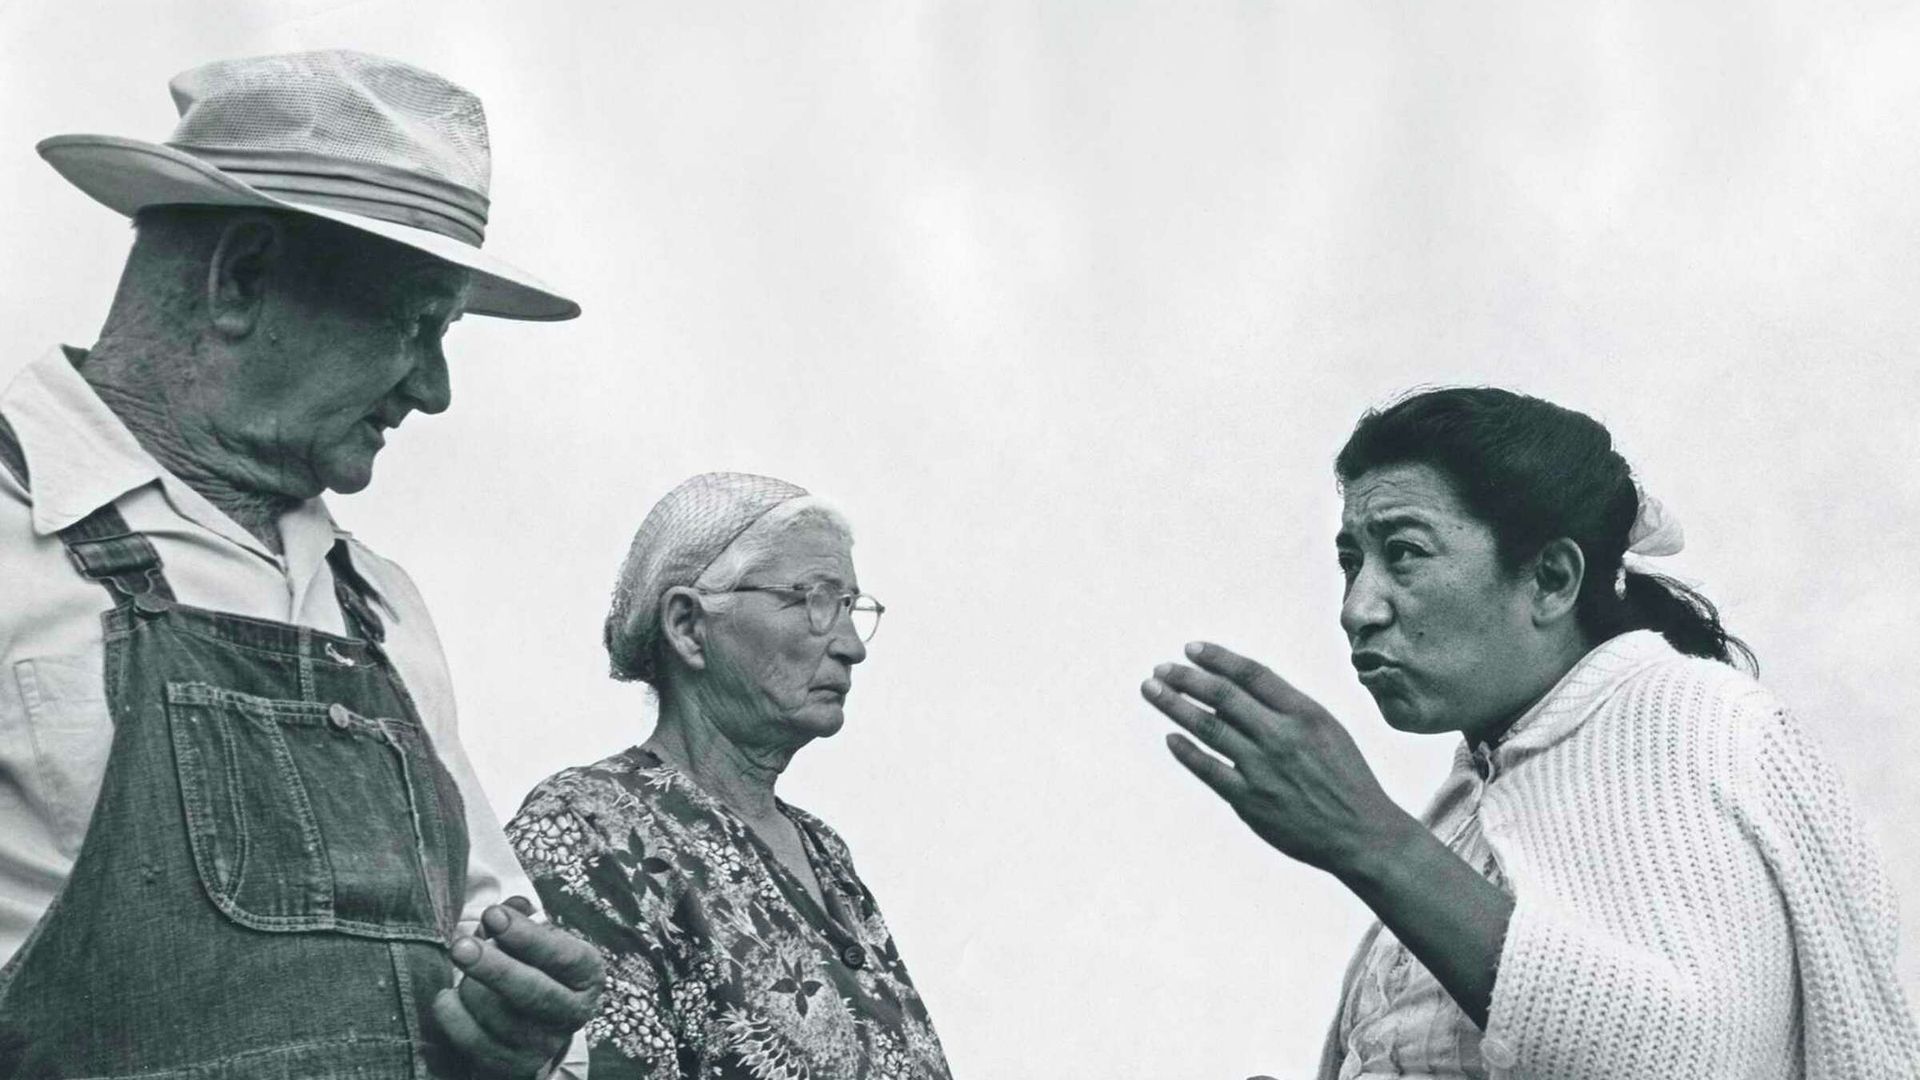 In this black and white photo, Maria Moreno speaks to two people with her hand out